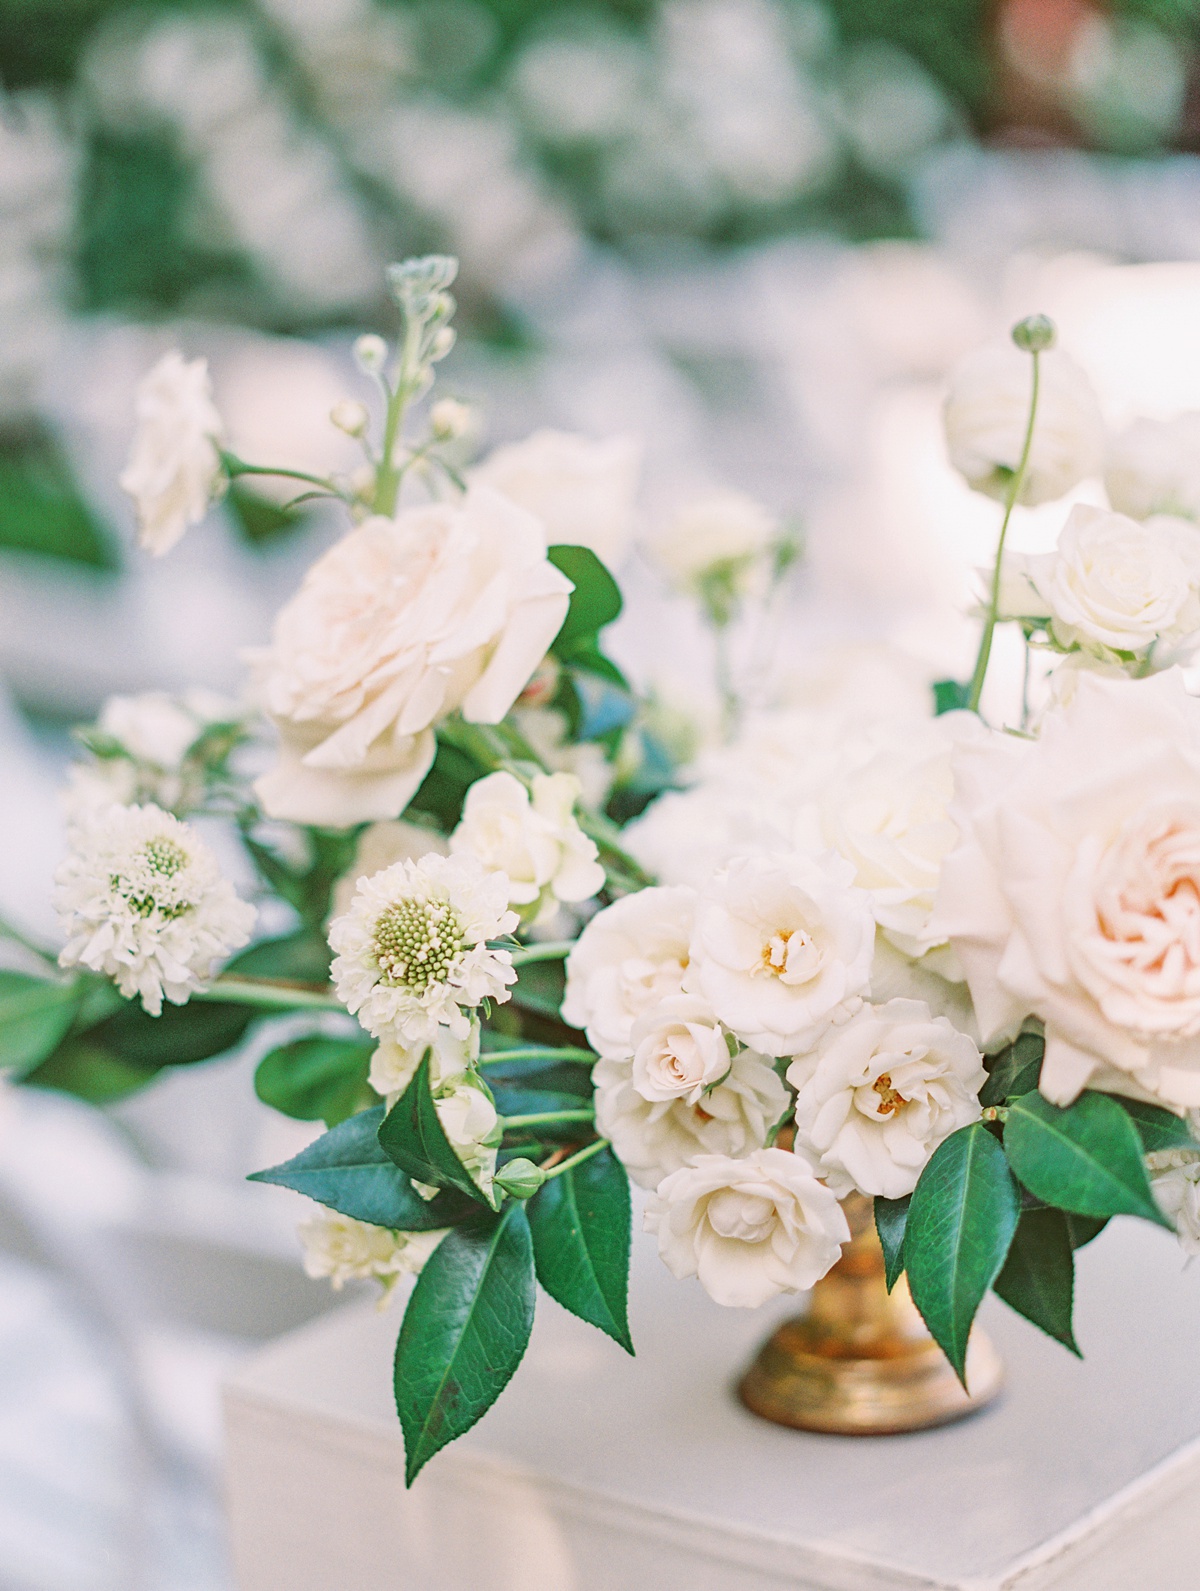 White flowers and greenery table piece | Wedding decor ideas